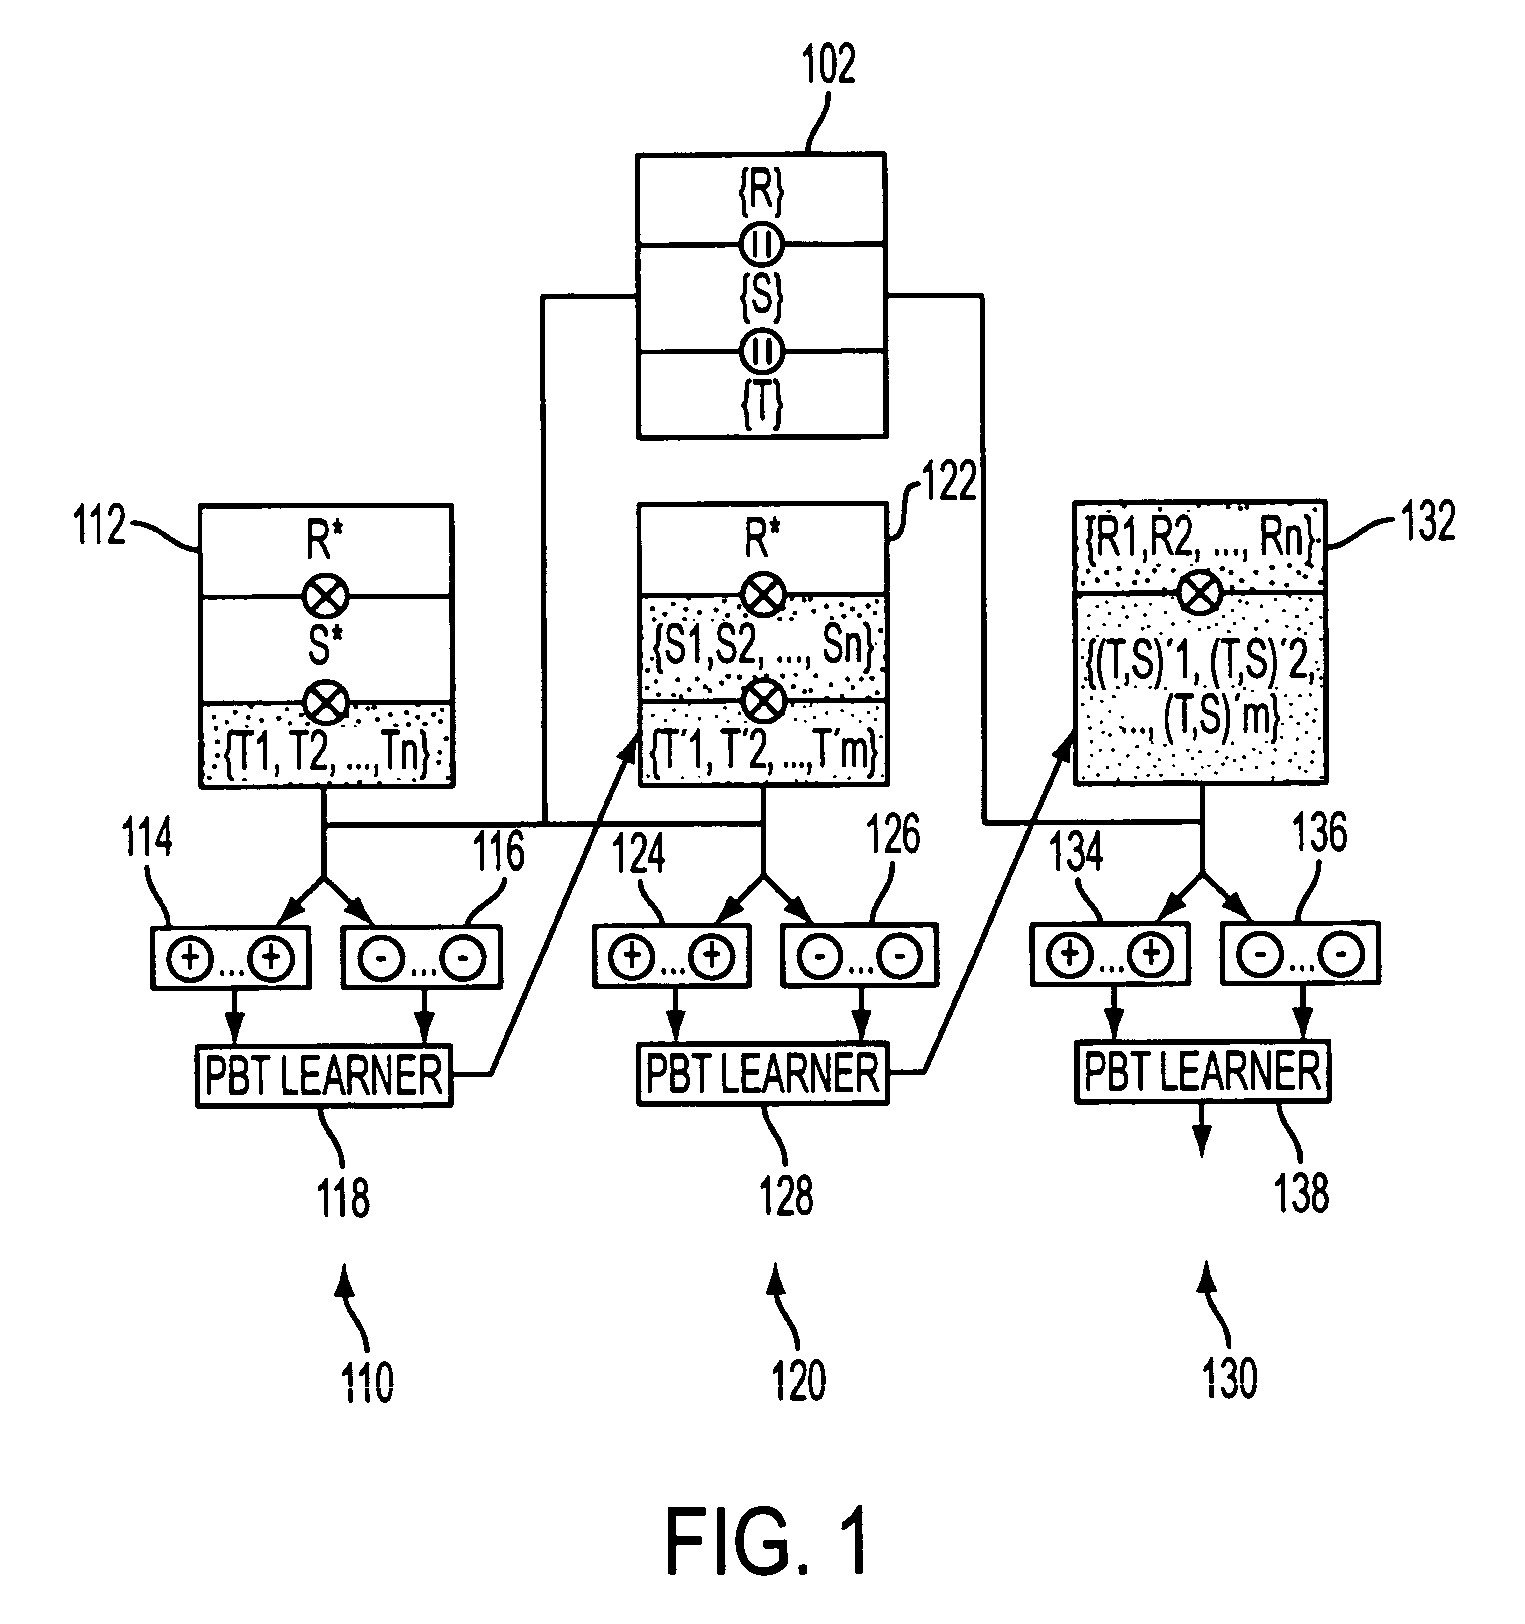 Method and system for detection and registration of 3D objects using incremental parameter learning